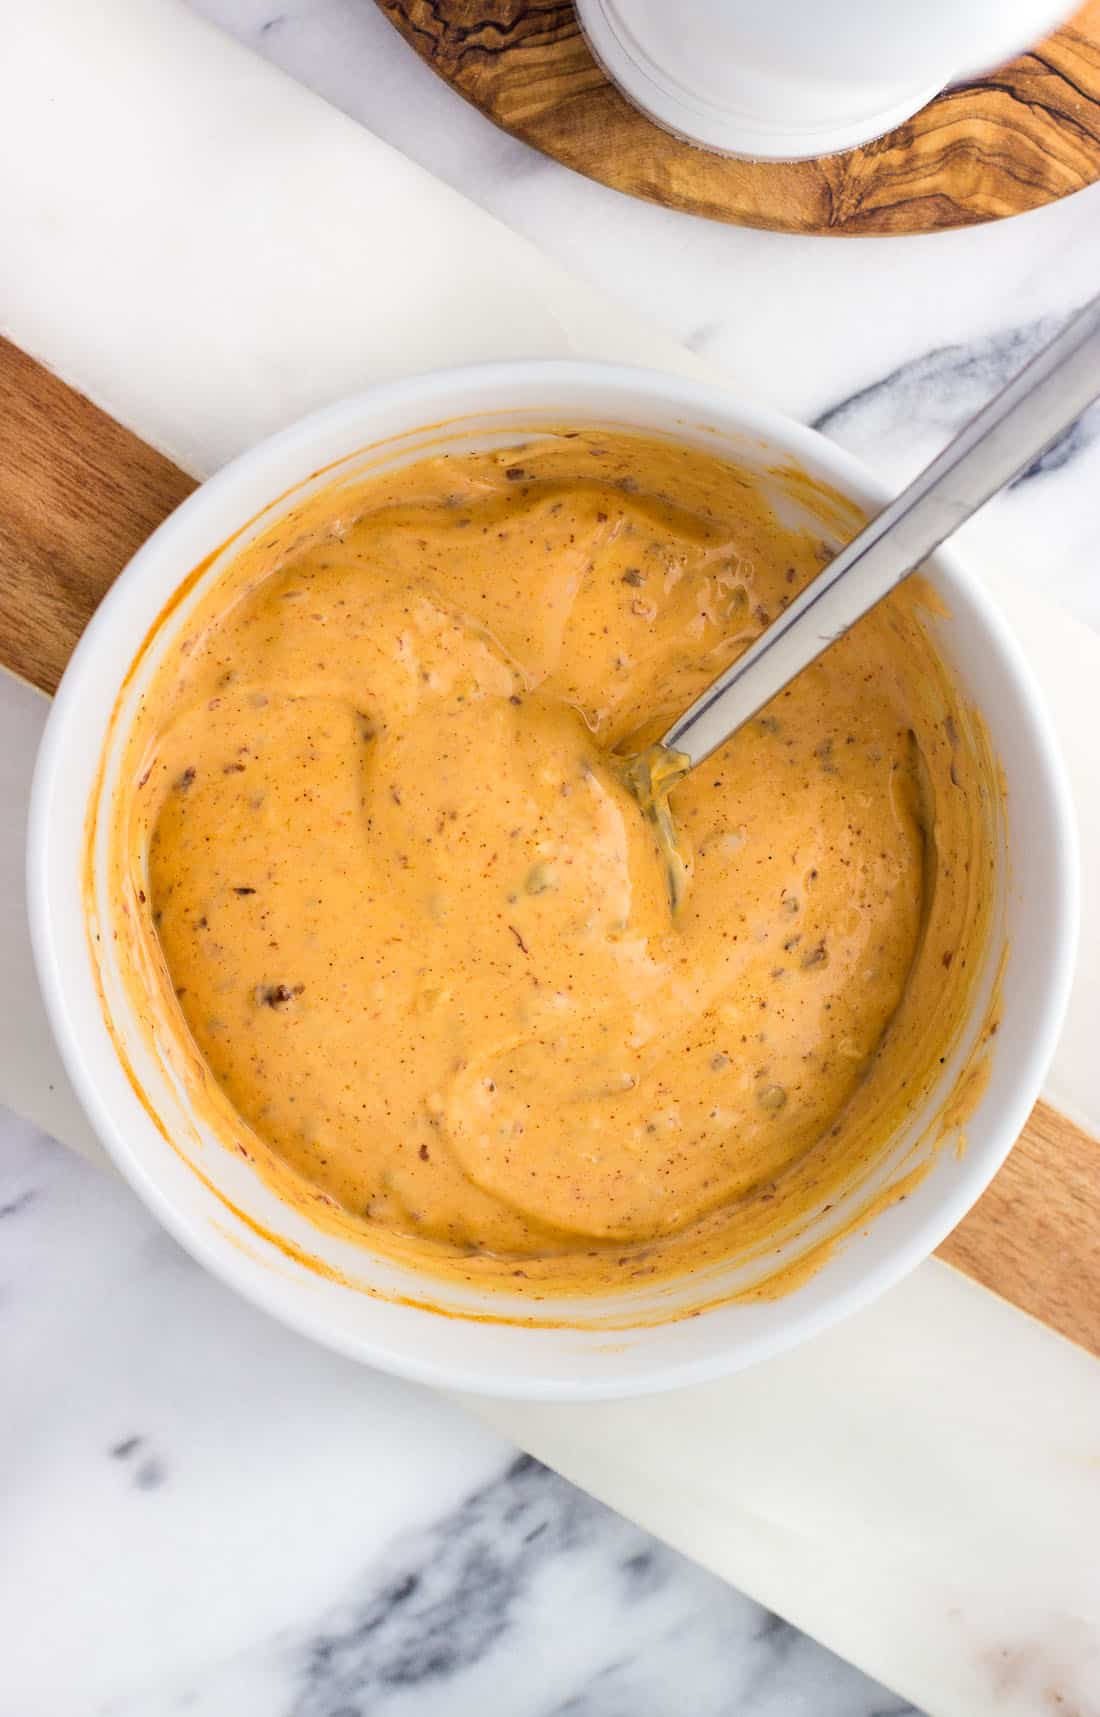 Chipotle aioli whisked together in a bowl